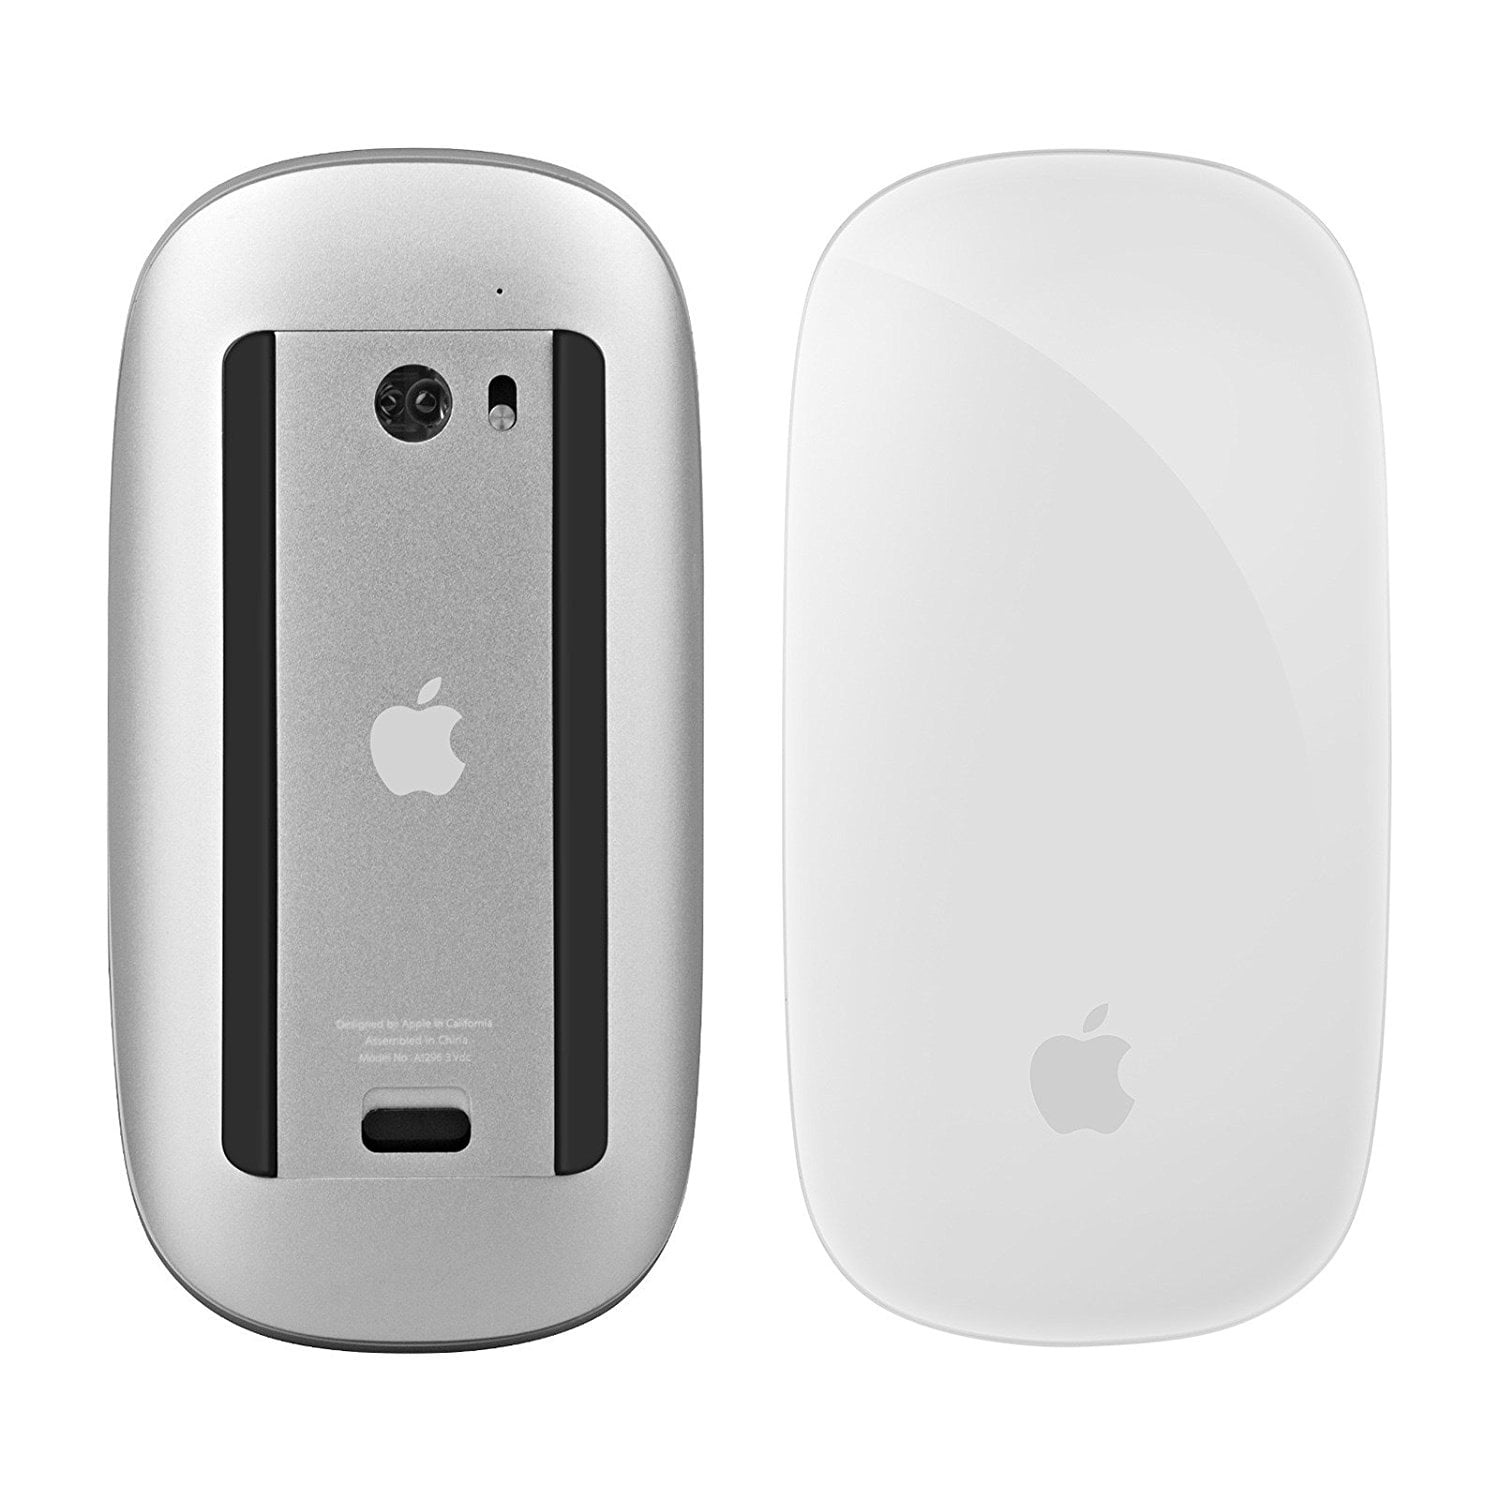 - Bluetooth Mouse (Refurbished) Apple Magic Restored MB829LL/A White Wireless A1296 Laser